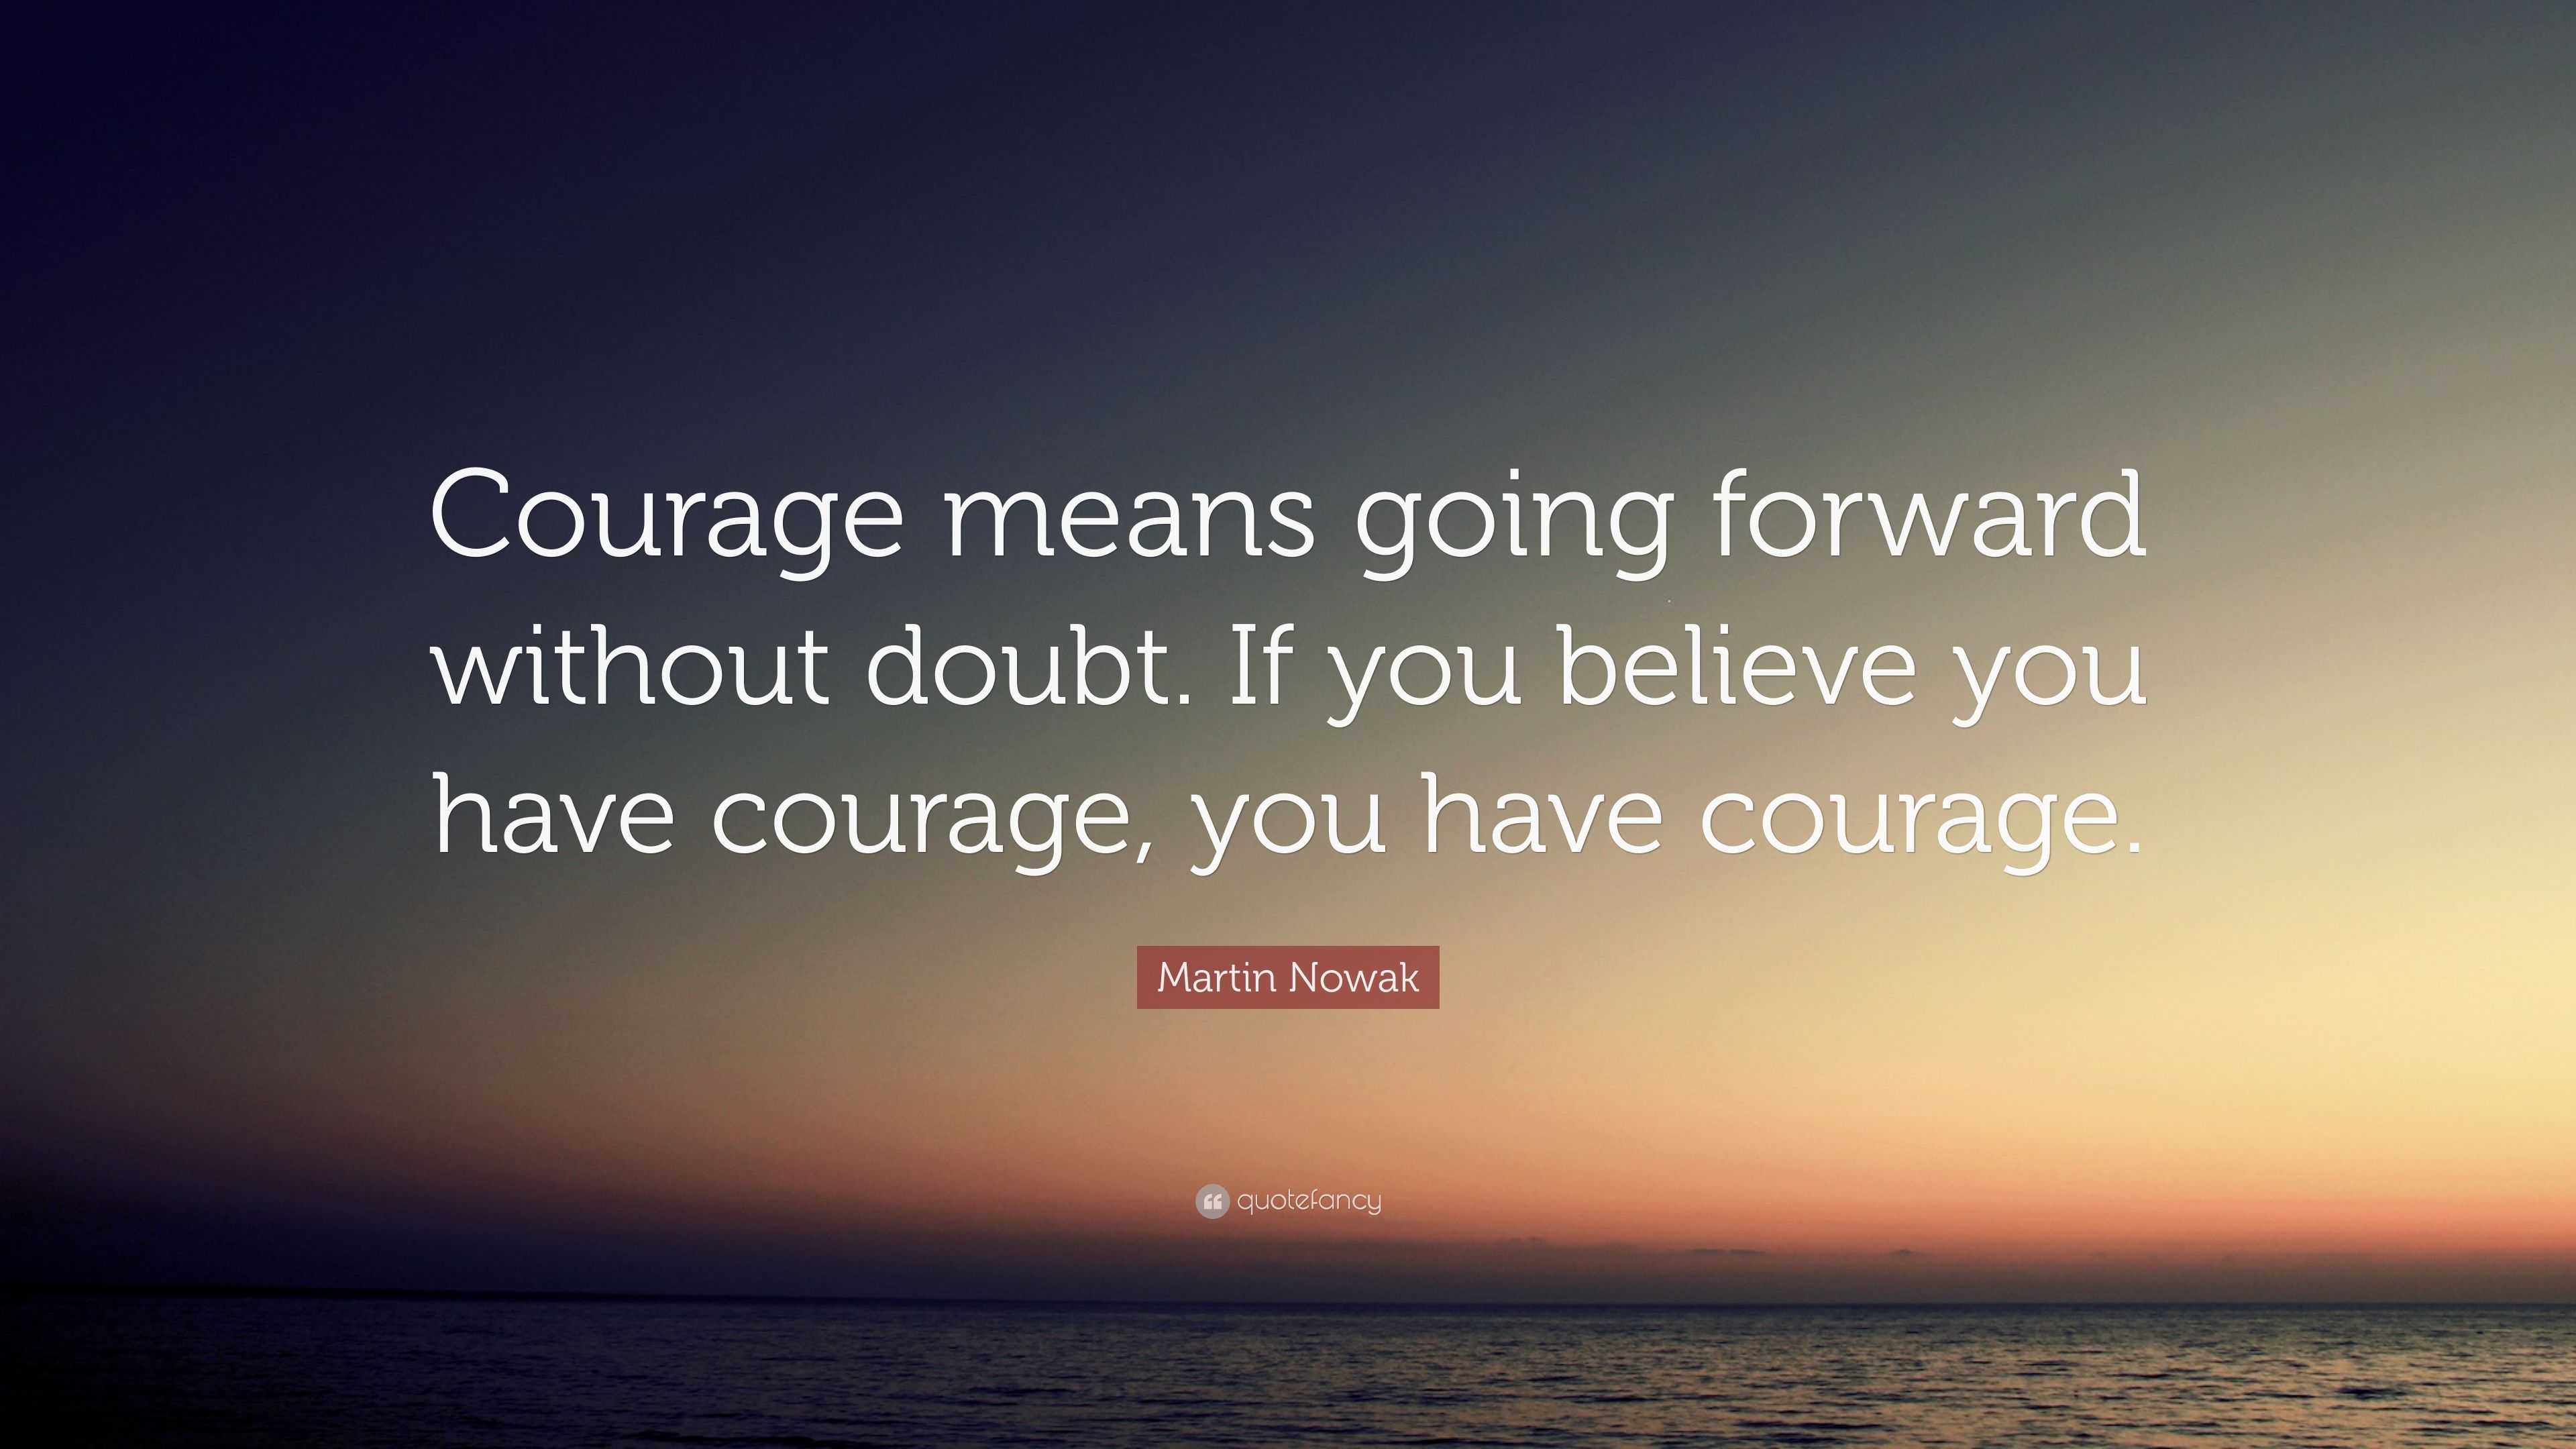 Martin Nowak Quote: “Courage means going forward without doubt. If you ...